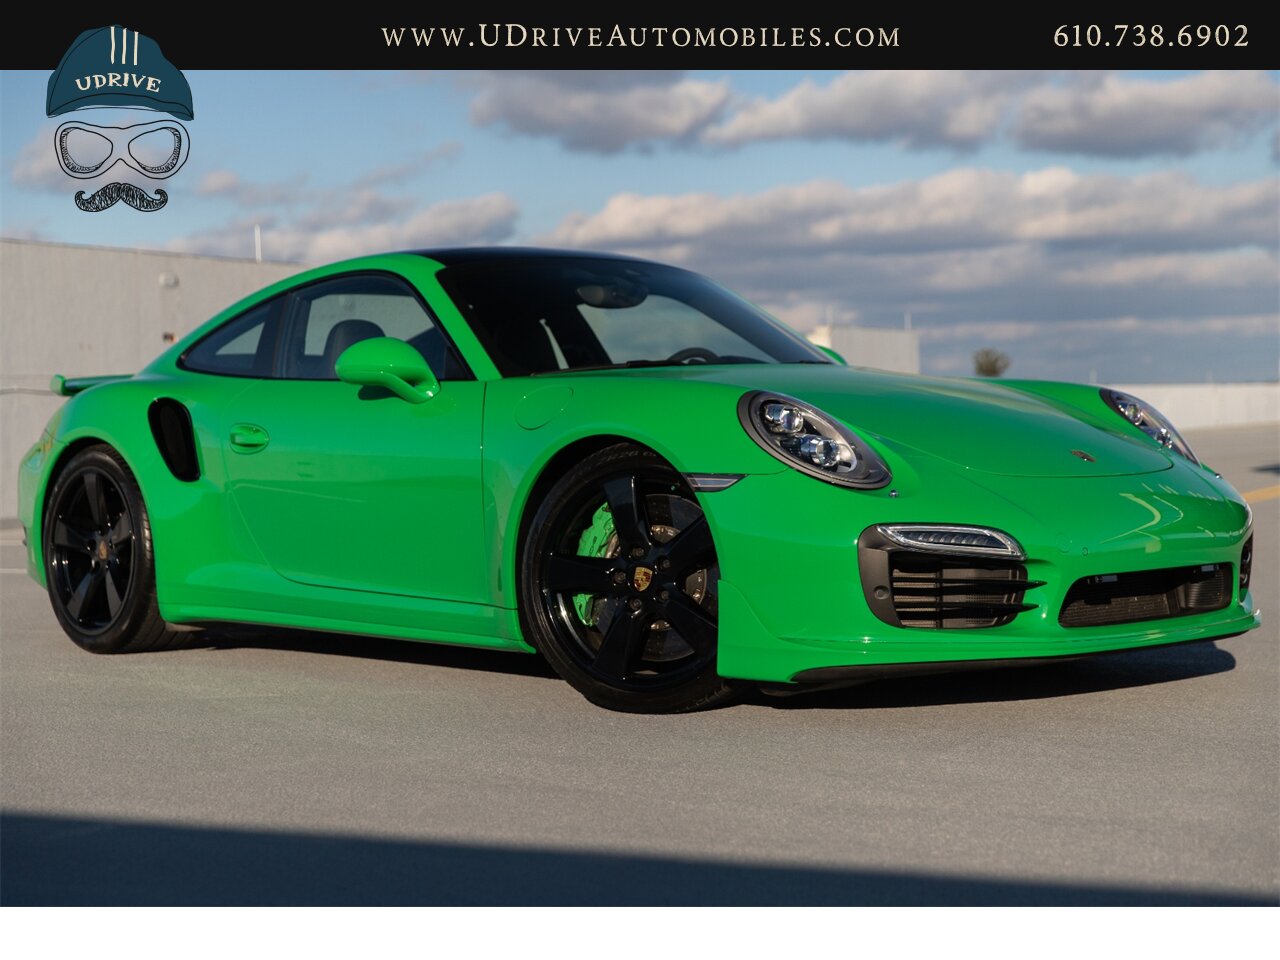 2016 Porsche 911 Turbo S PTS Viper Green Aerokit $203k MSRP  Painted Side Skirts Painted Grilles Wheels in Black - Photo 4 - West Chester, PA 19382